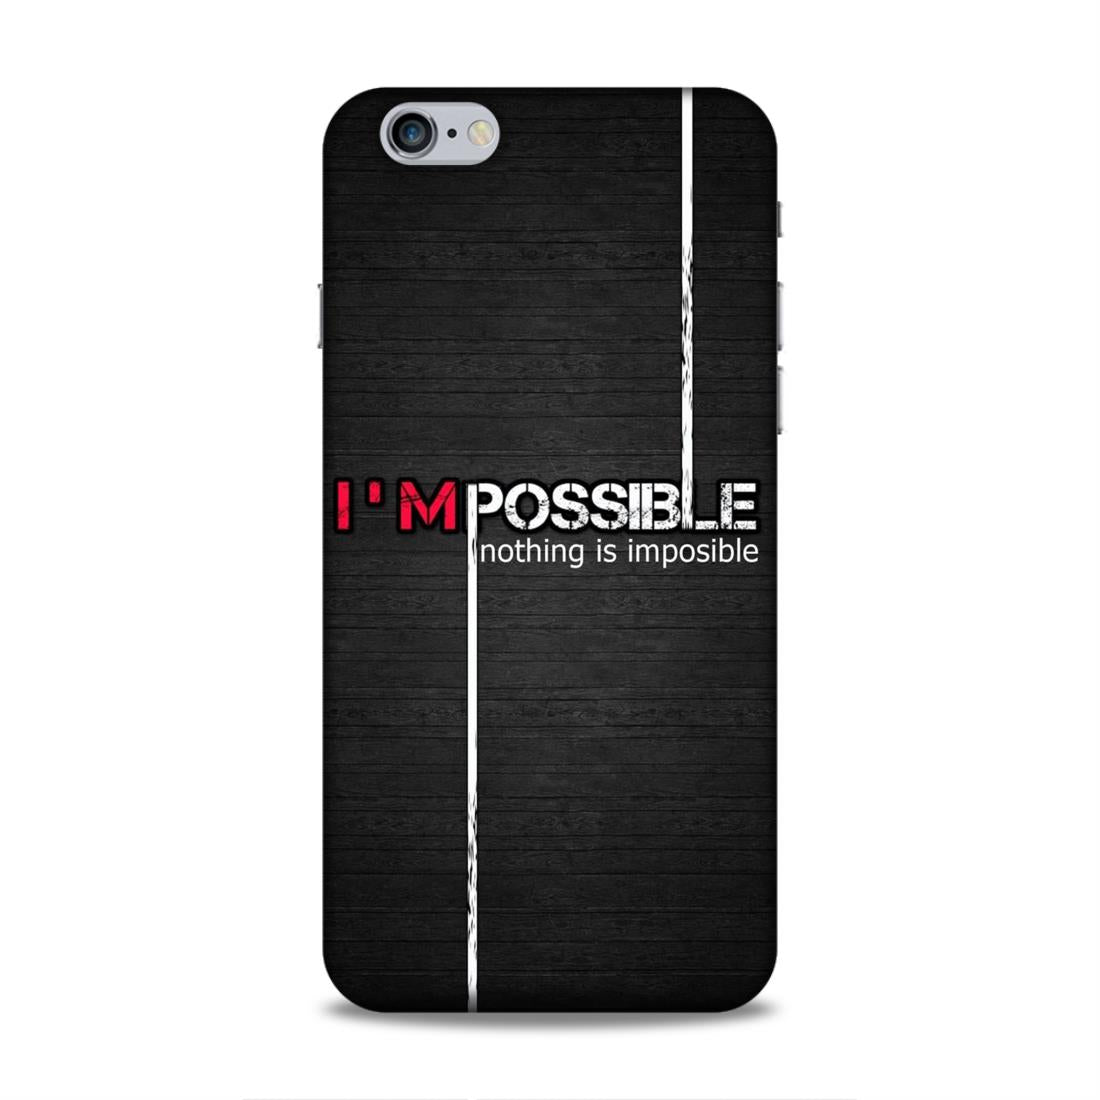 I'm Possible Hard Back Case For Apple iPhone 6 Plus / 6s Plus